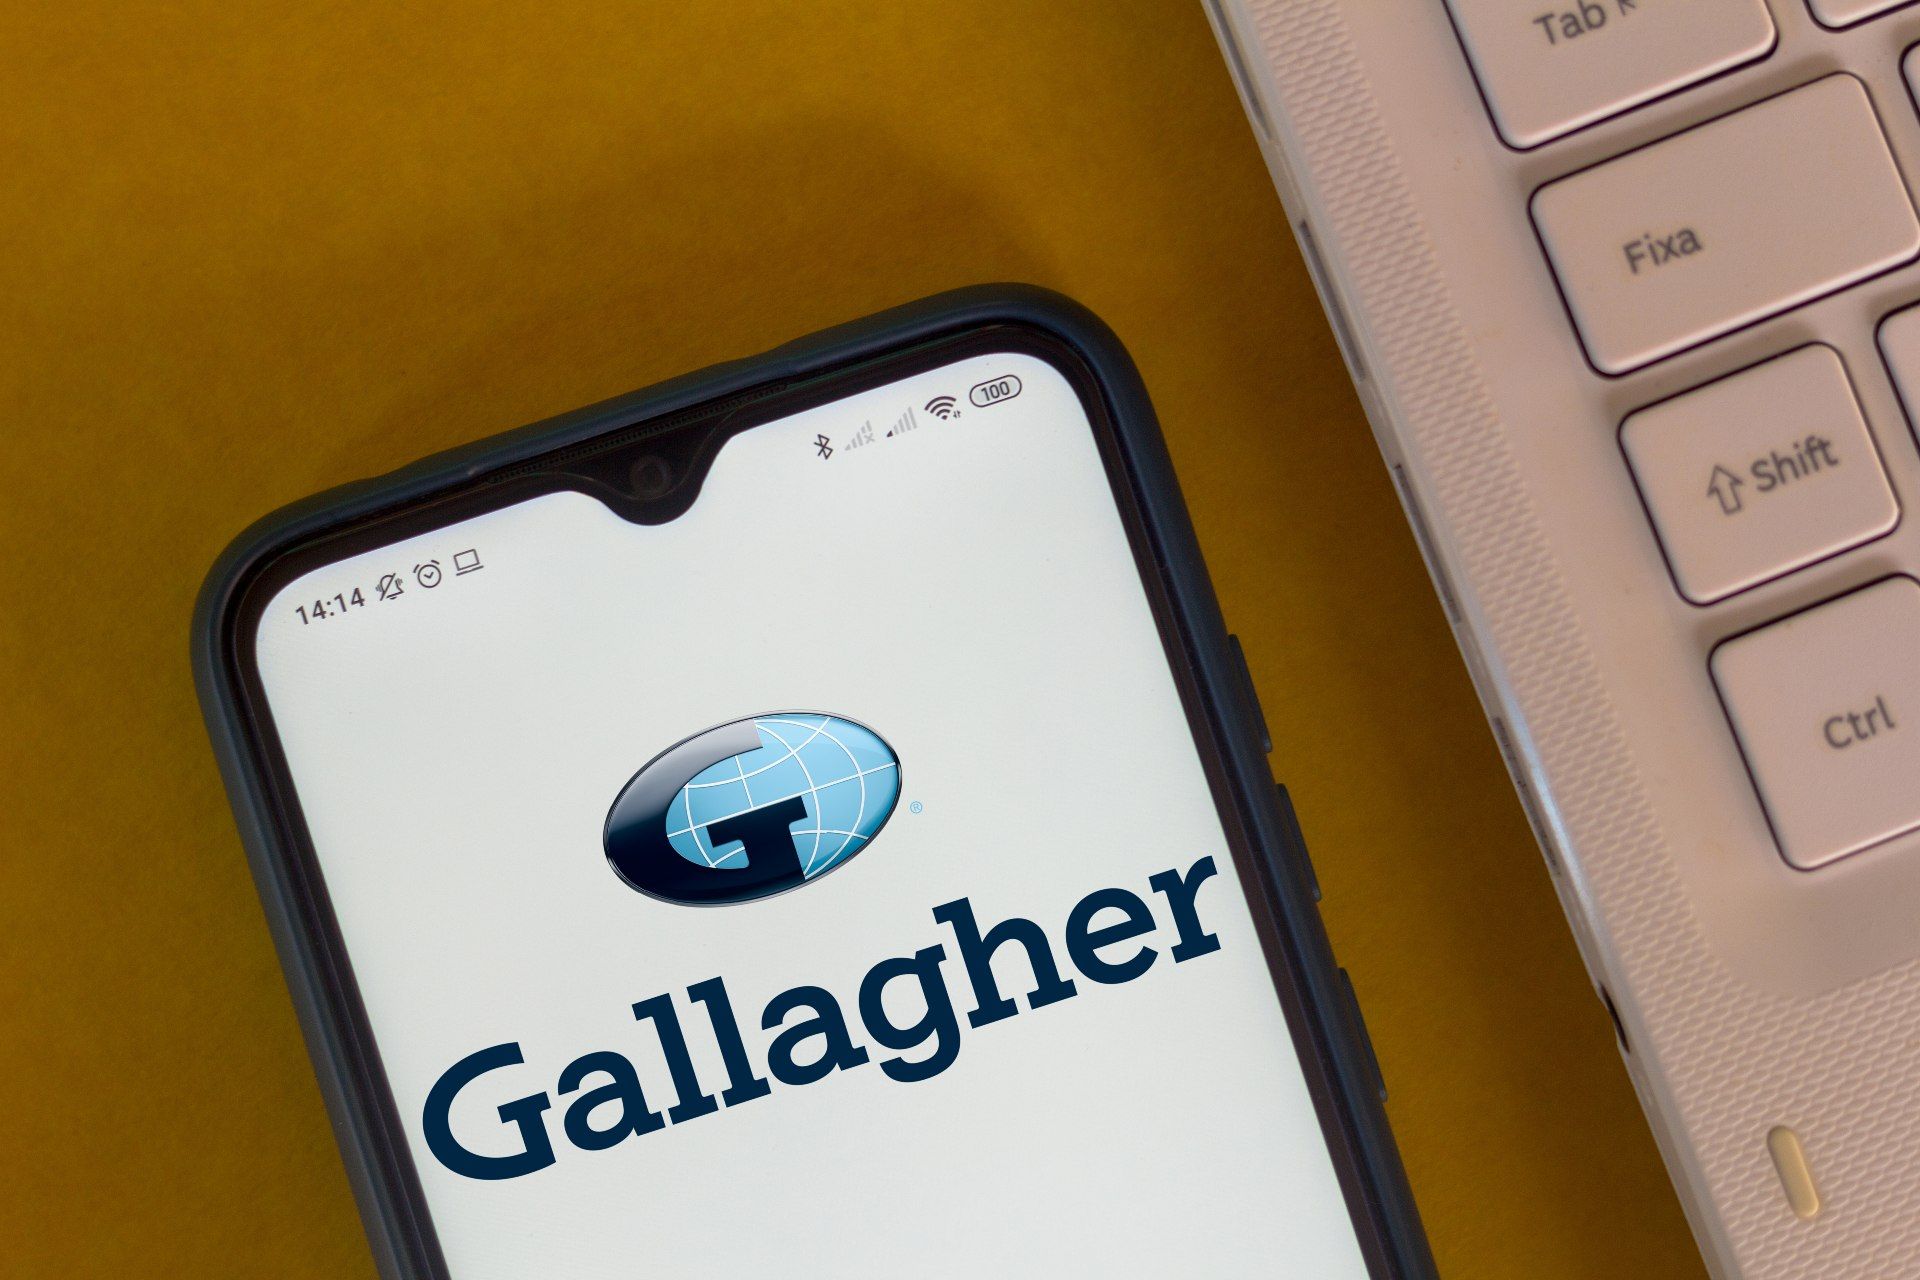 The Arthur J. Gallagher logo is seen on the screen of a smartphone lying next to a computer keyboard